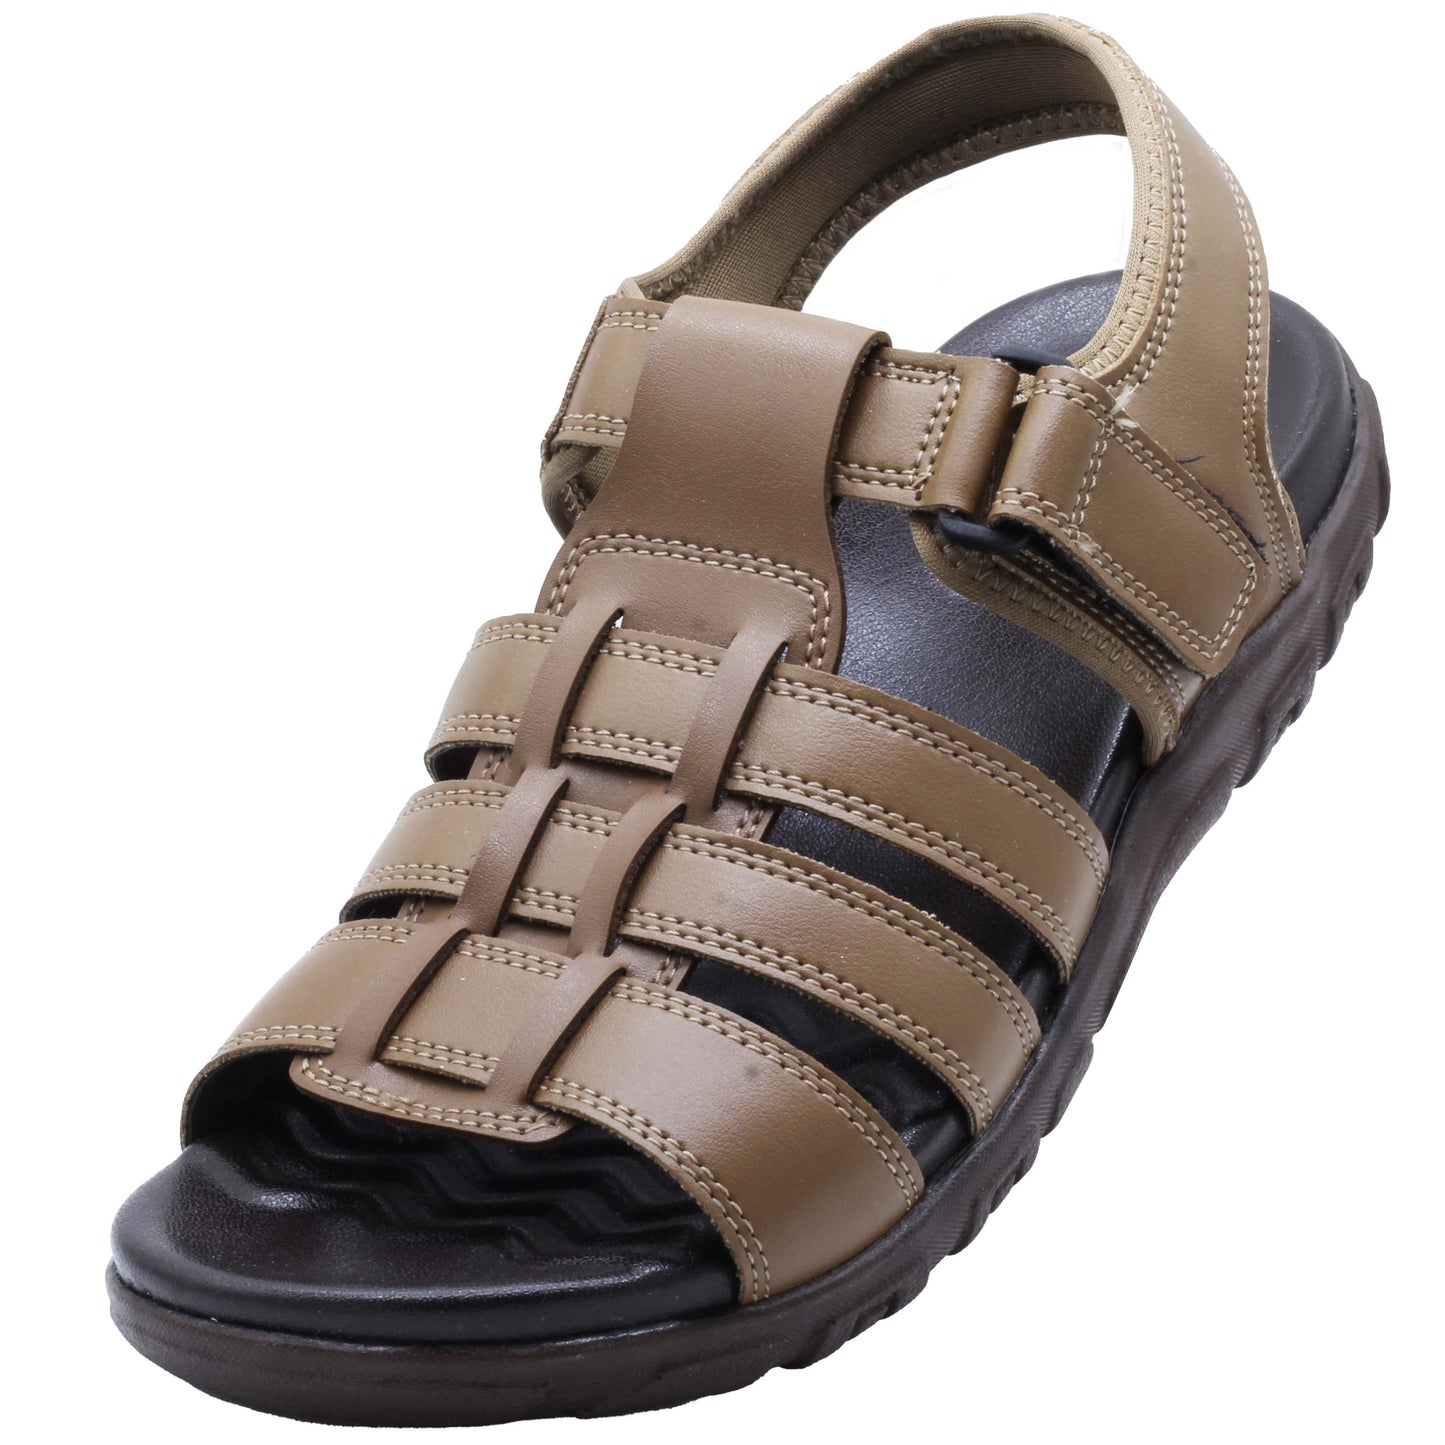 Medifeet Mens Casual Soft Ortho Ankle Support Sandals MFR 225